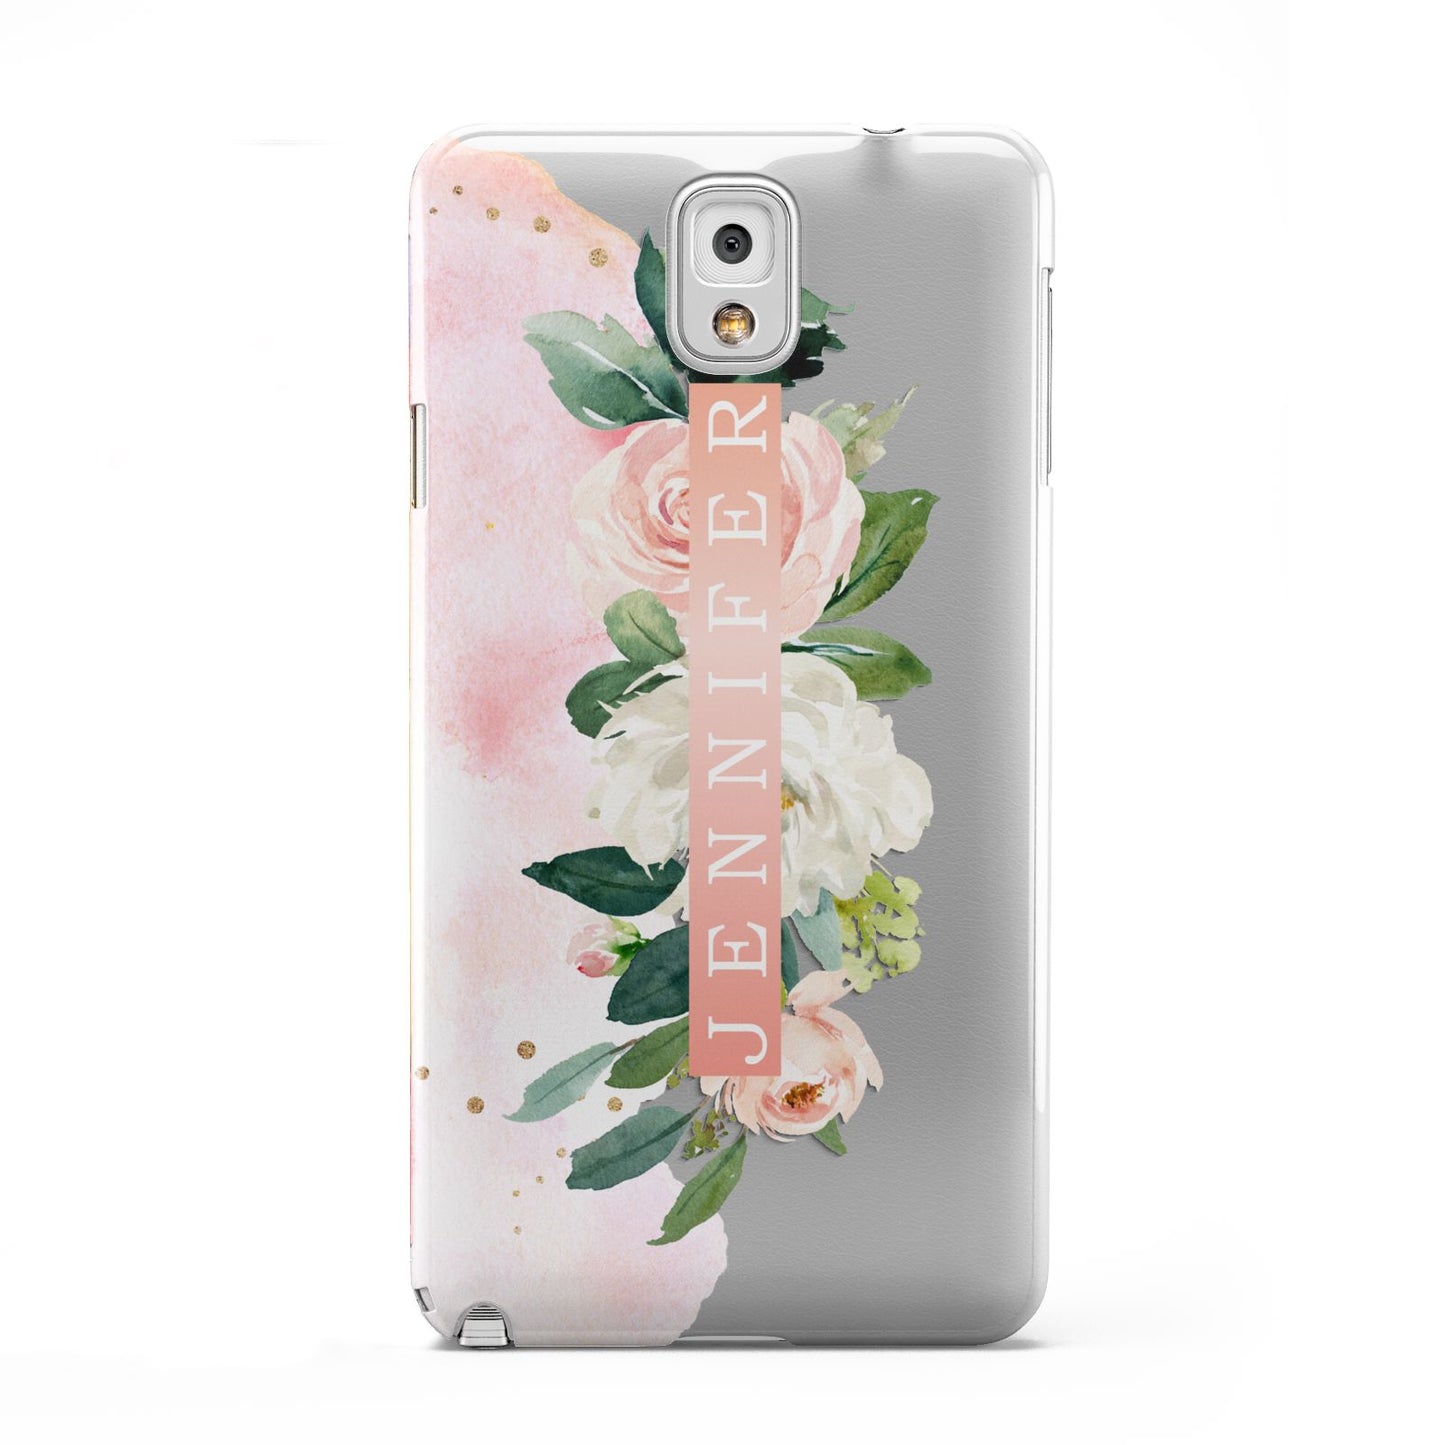 Blush Pink Personalised Name Floral Samsung Galaxy Note 3 Case